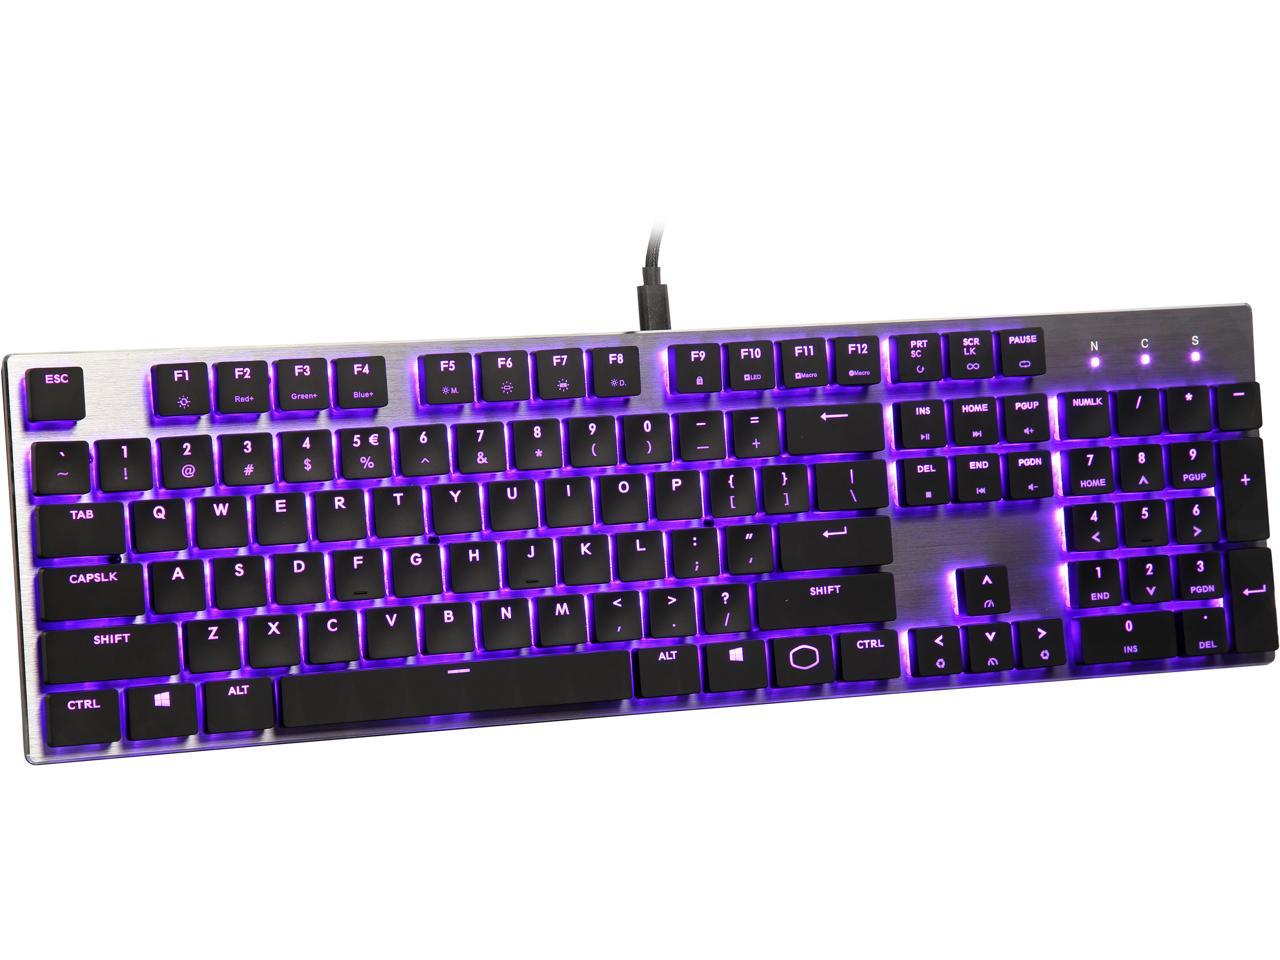 Cooler Master SK650 Mechanical Keyboard with Cherry MX Low Profile Switches  in Brushed Aluminum Design, Gunmetal Black